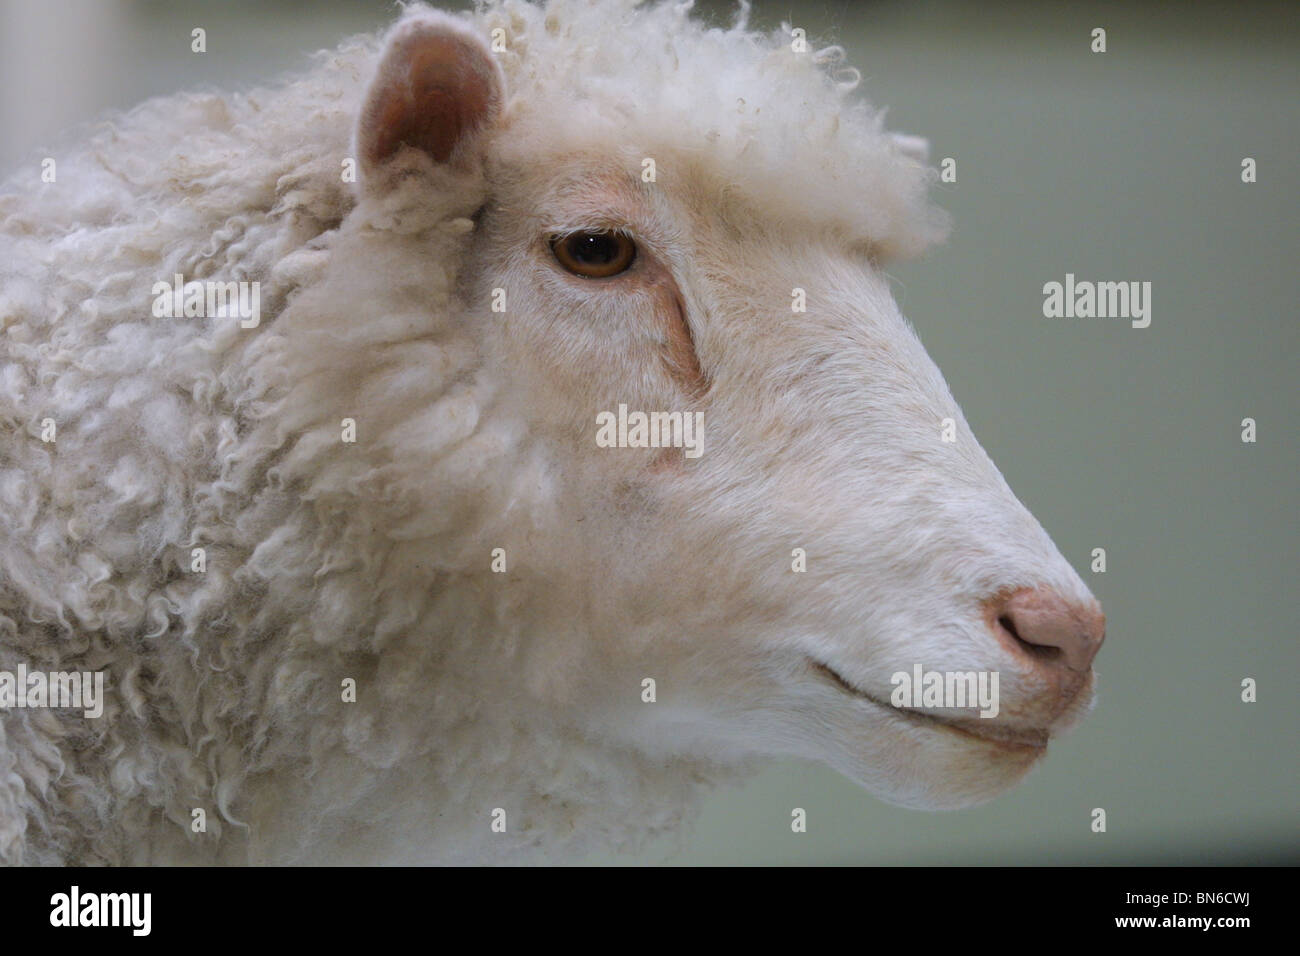 Dolly The Sheep, the world's first cloned mammal, created by Professor Sir  Ian Wilmut, on display at Royal Museum of Scotland Stock Photo - Alamy